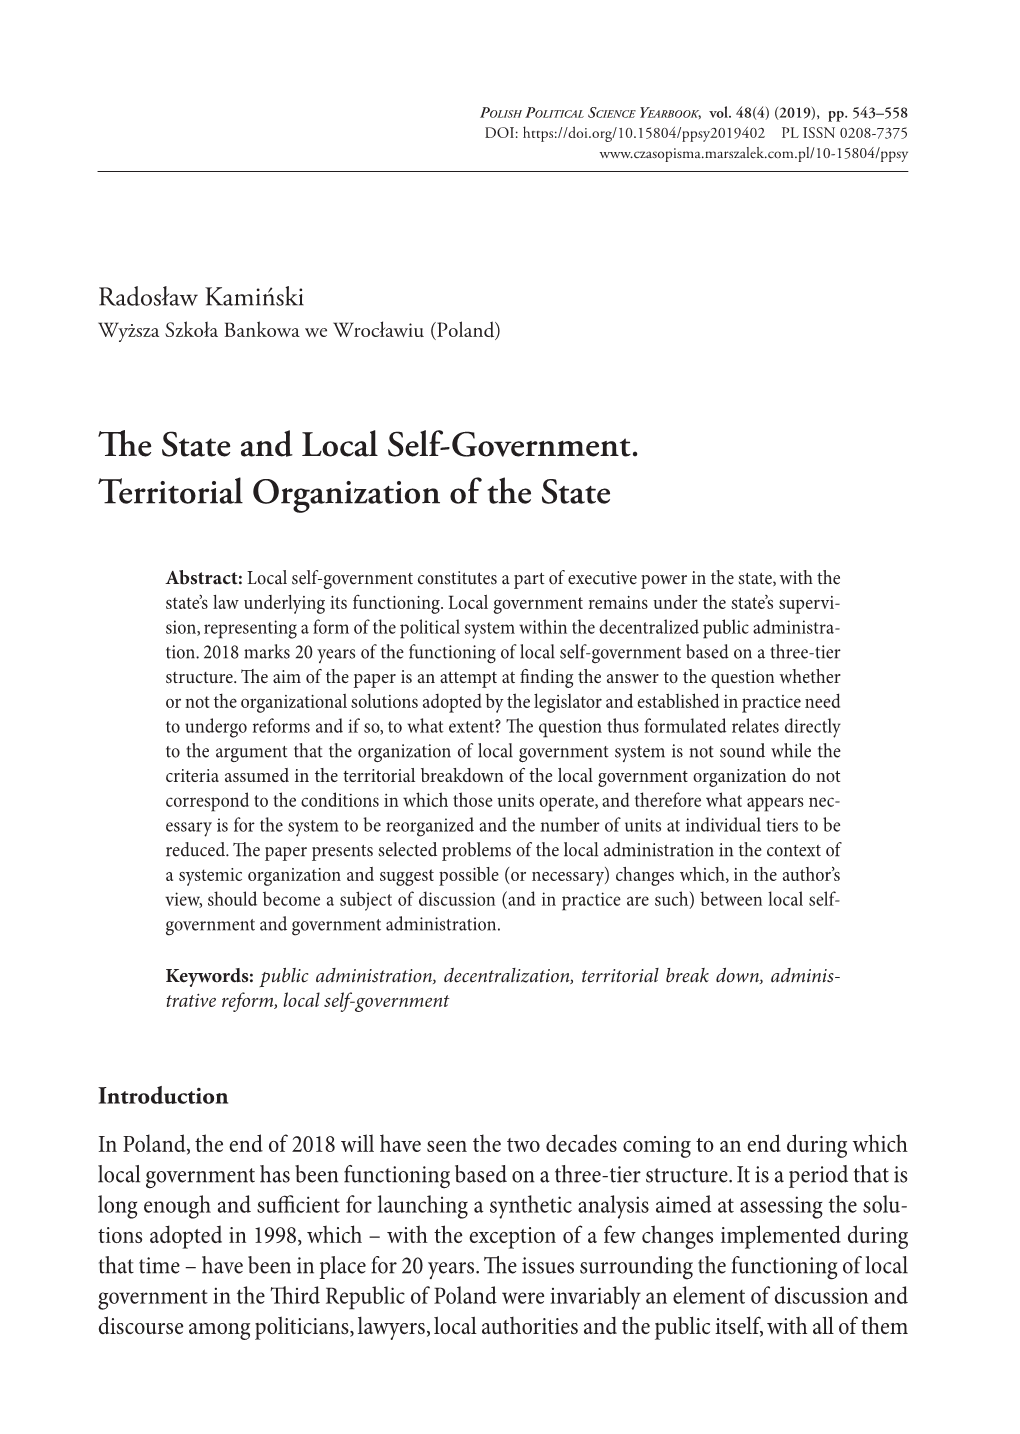 The State and Local Self-Government. Territorial Organization of the State